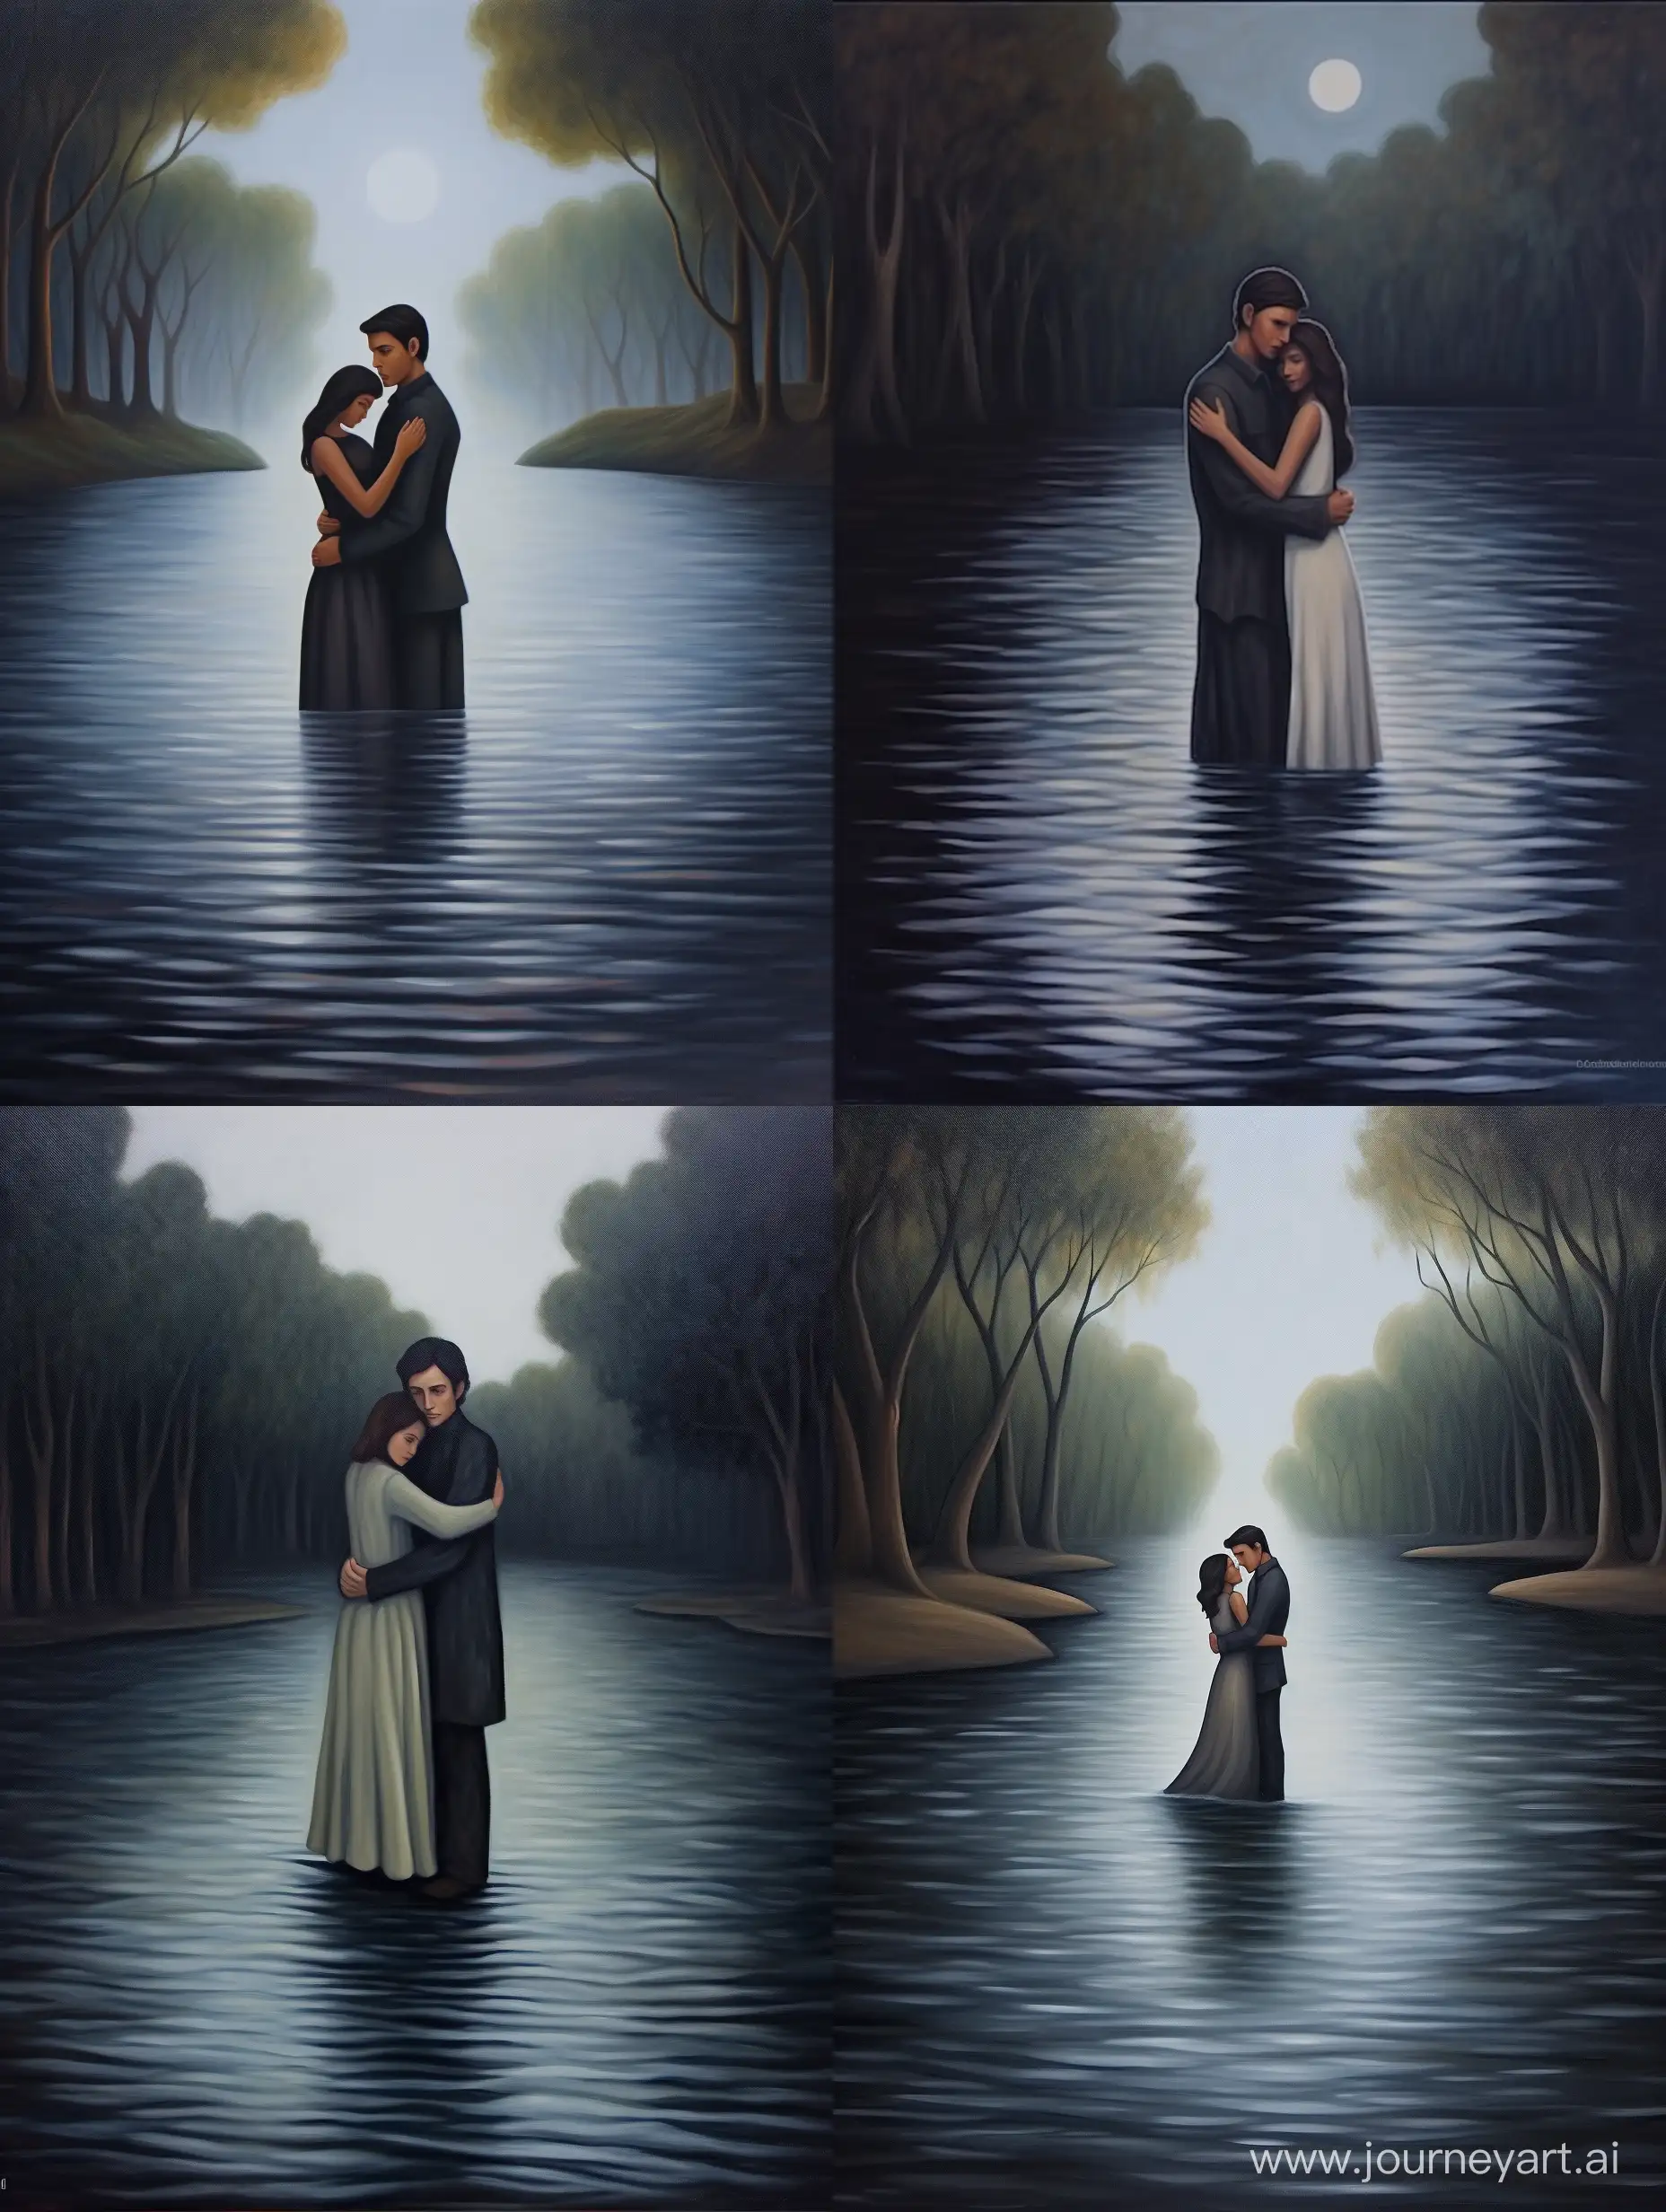 Romantic-Nighttime-Embrace-in-Water-Intimate-Couple-Oil-Painting